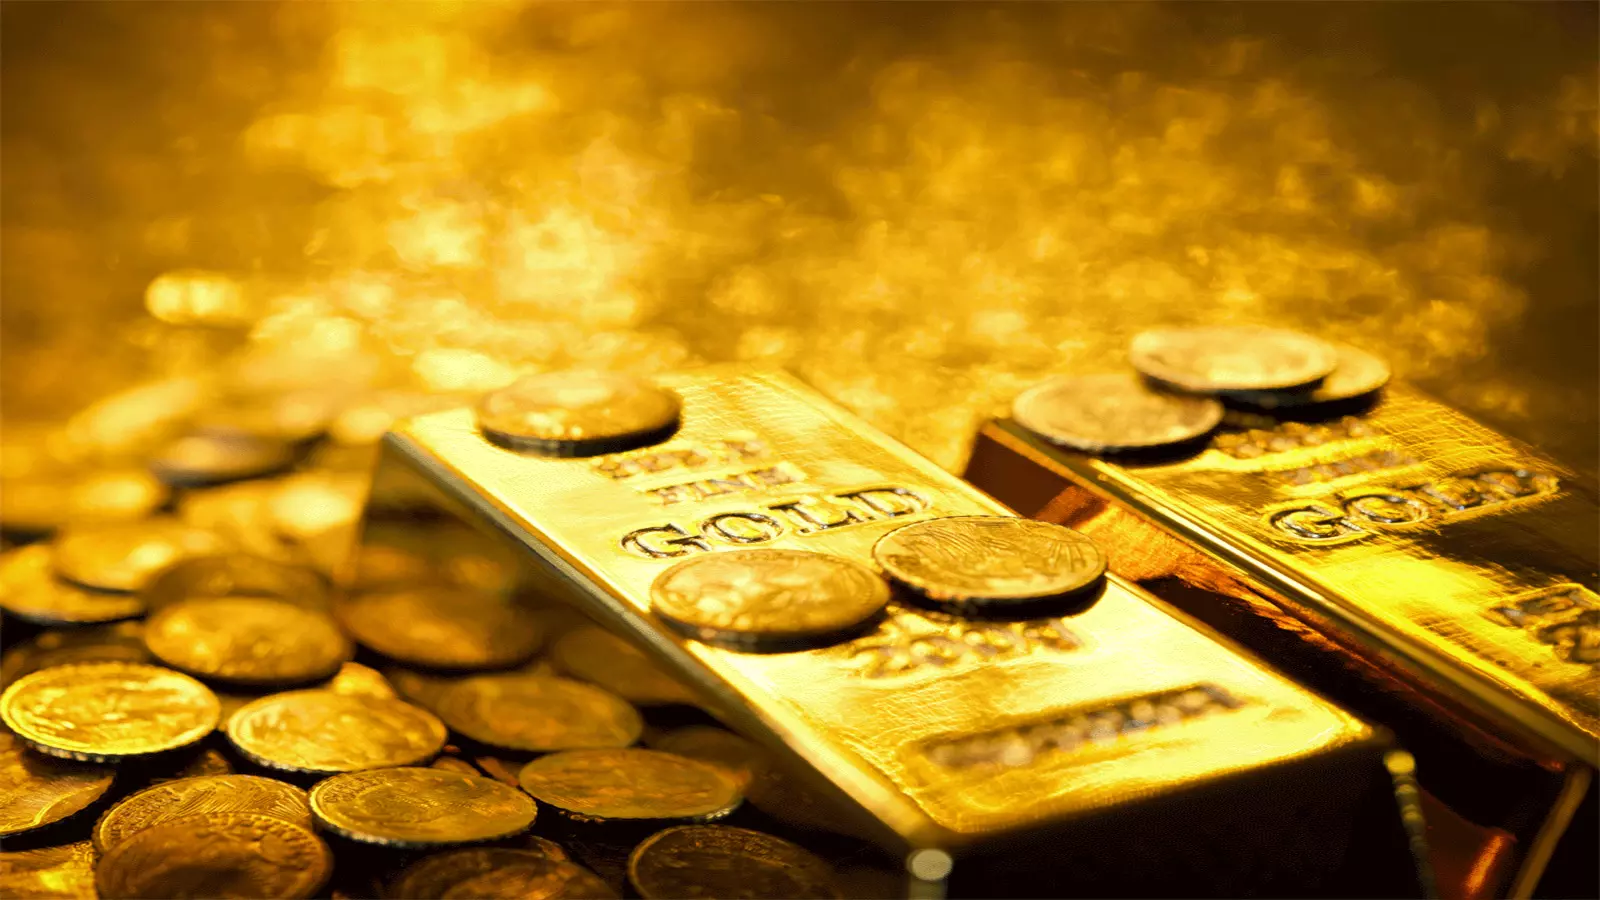 Gold became costlier by 25% in 6 months: It rose from ₹57 thousand to ₹70 thousand